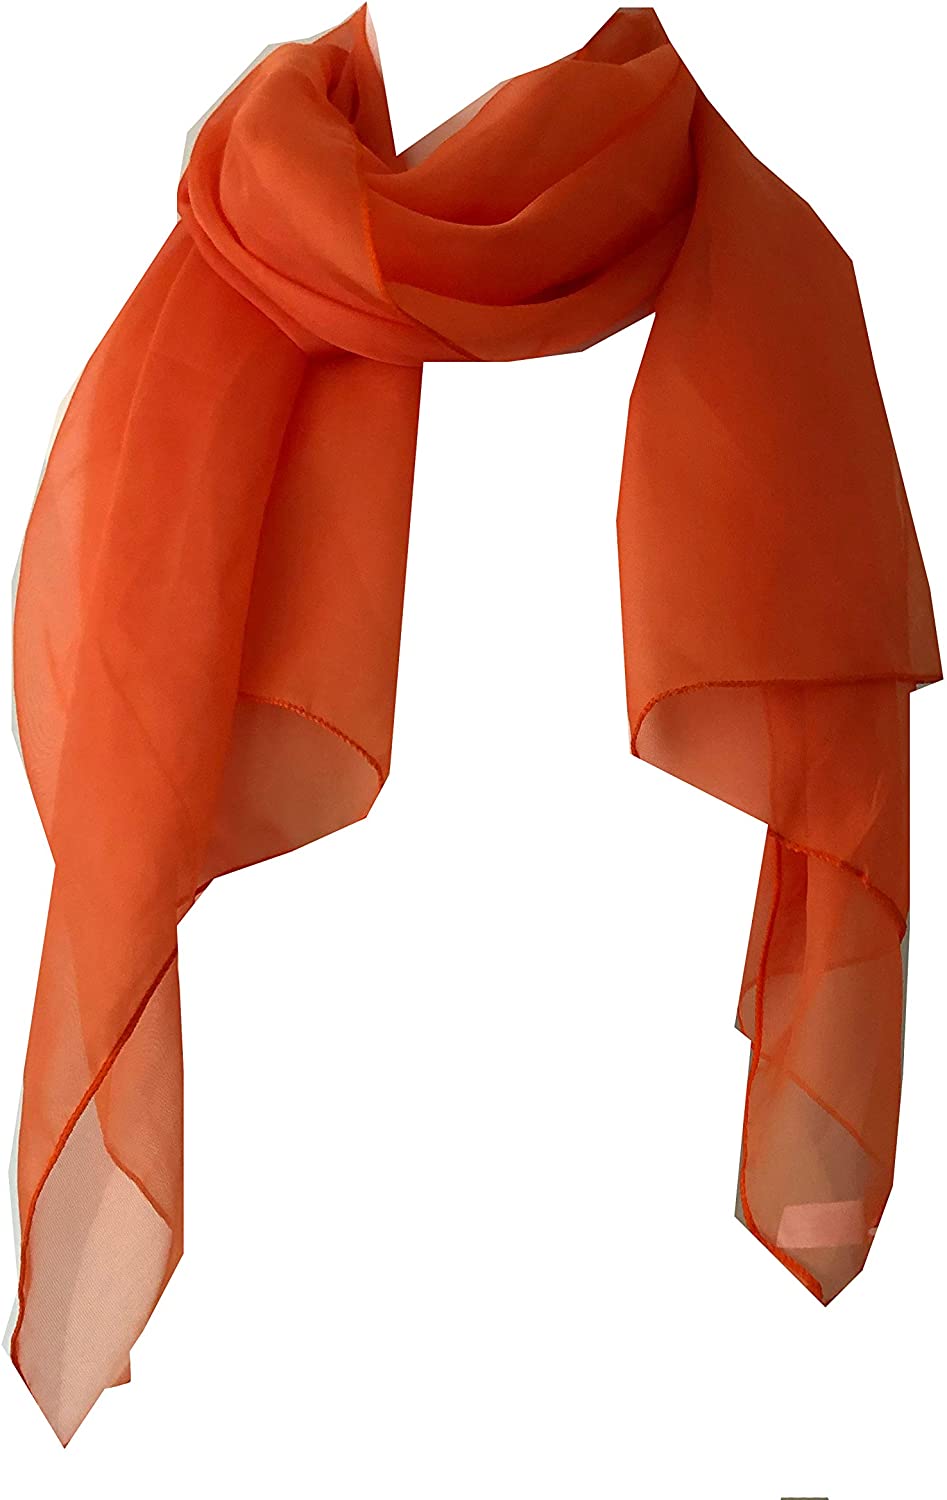 Plain Orange Chiffon Style Scarf Thin Pretty Scarf Great for Any Outfit Lovely Gift